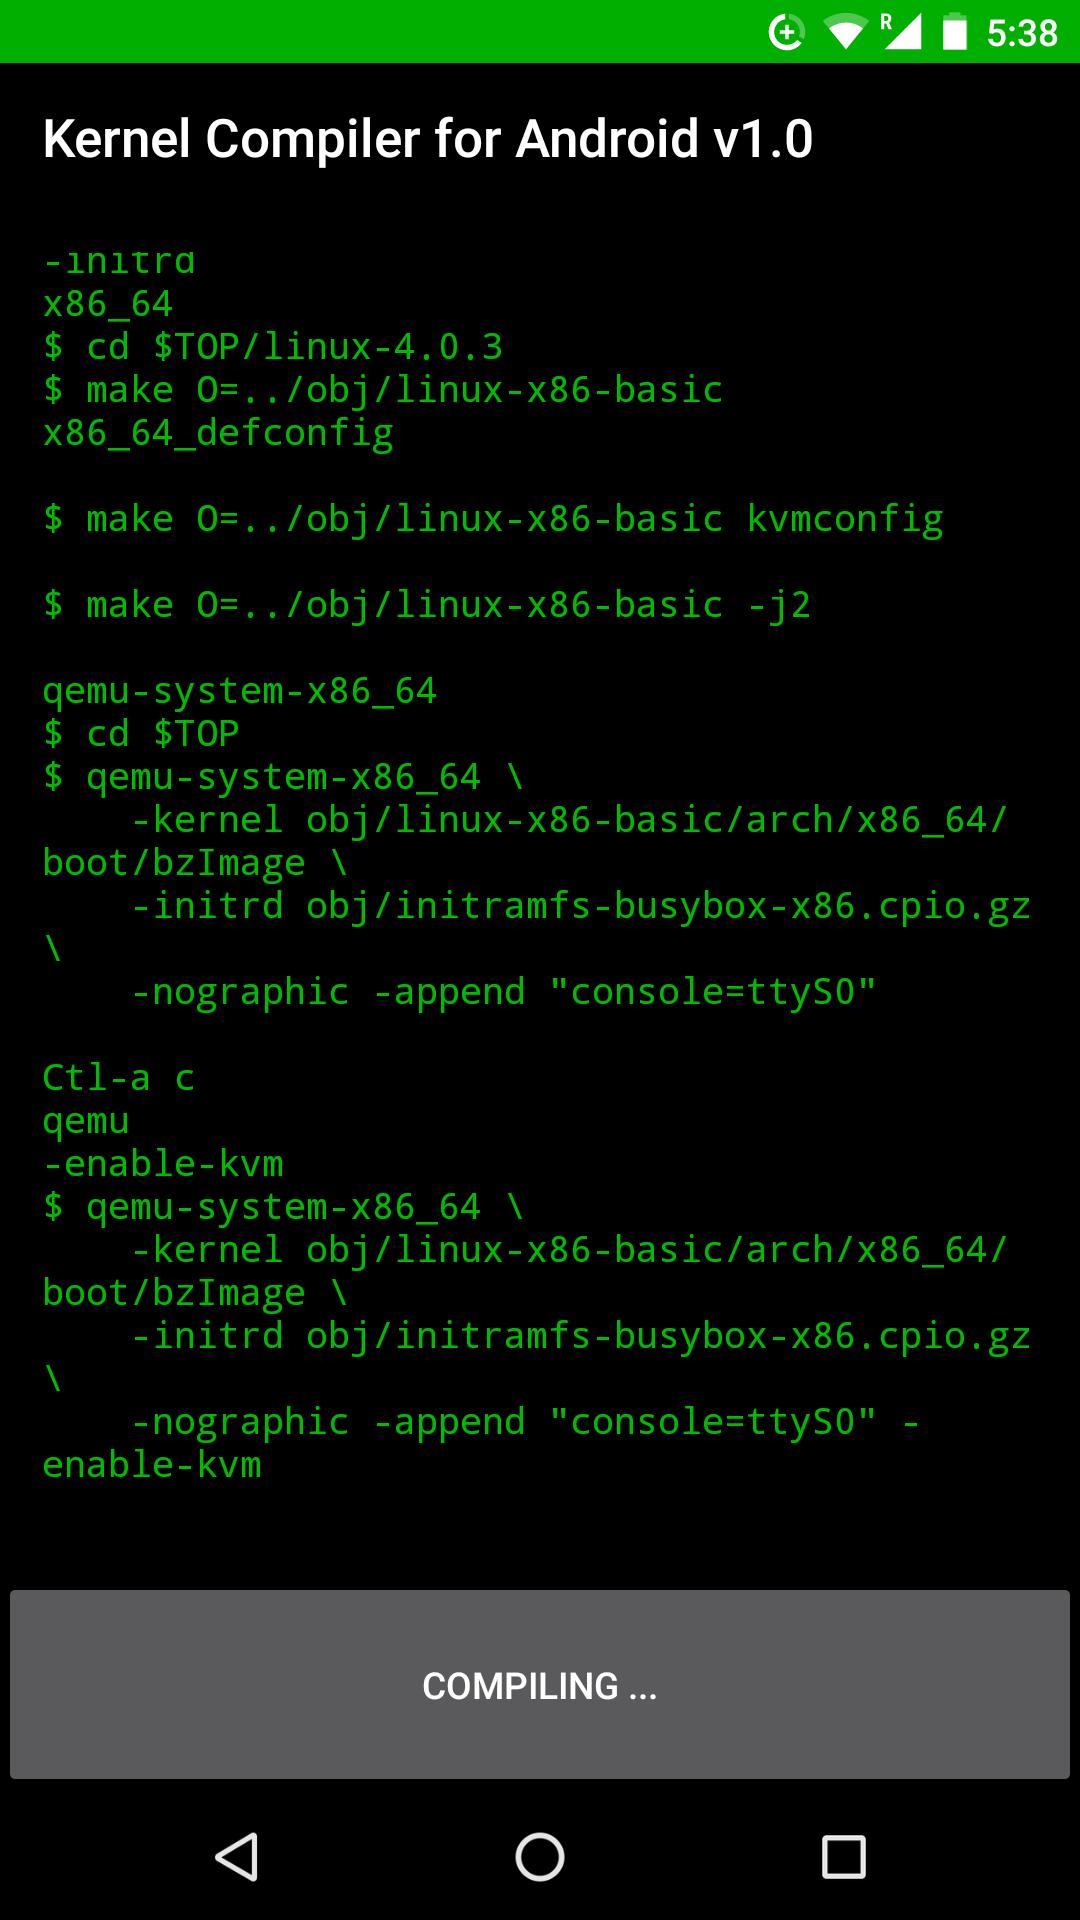 Compile kernel. Android Kernel. Ядро Android.